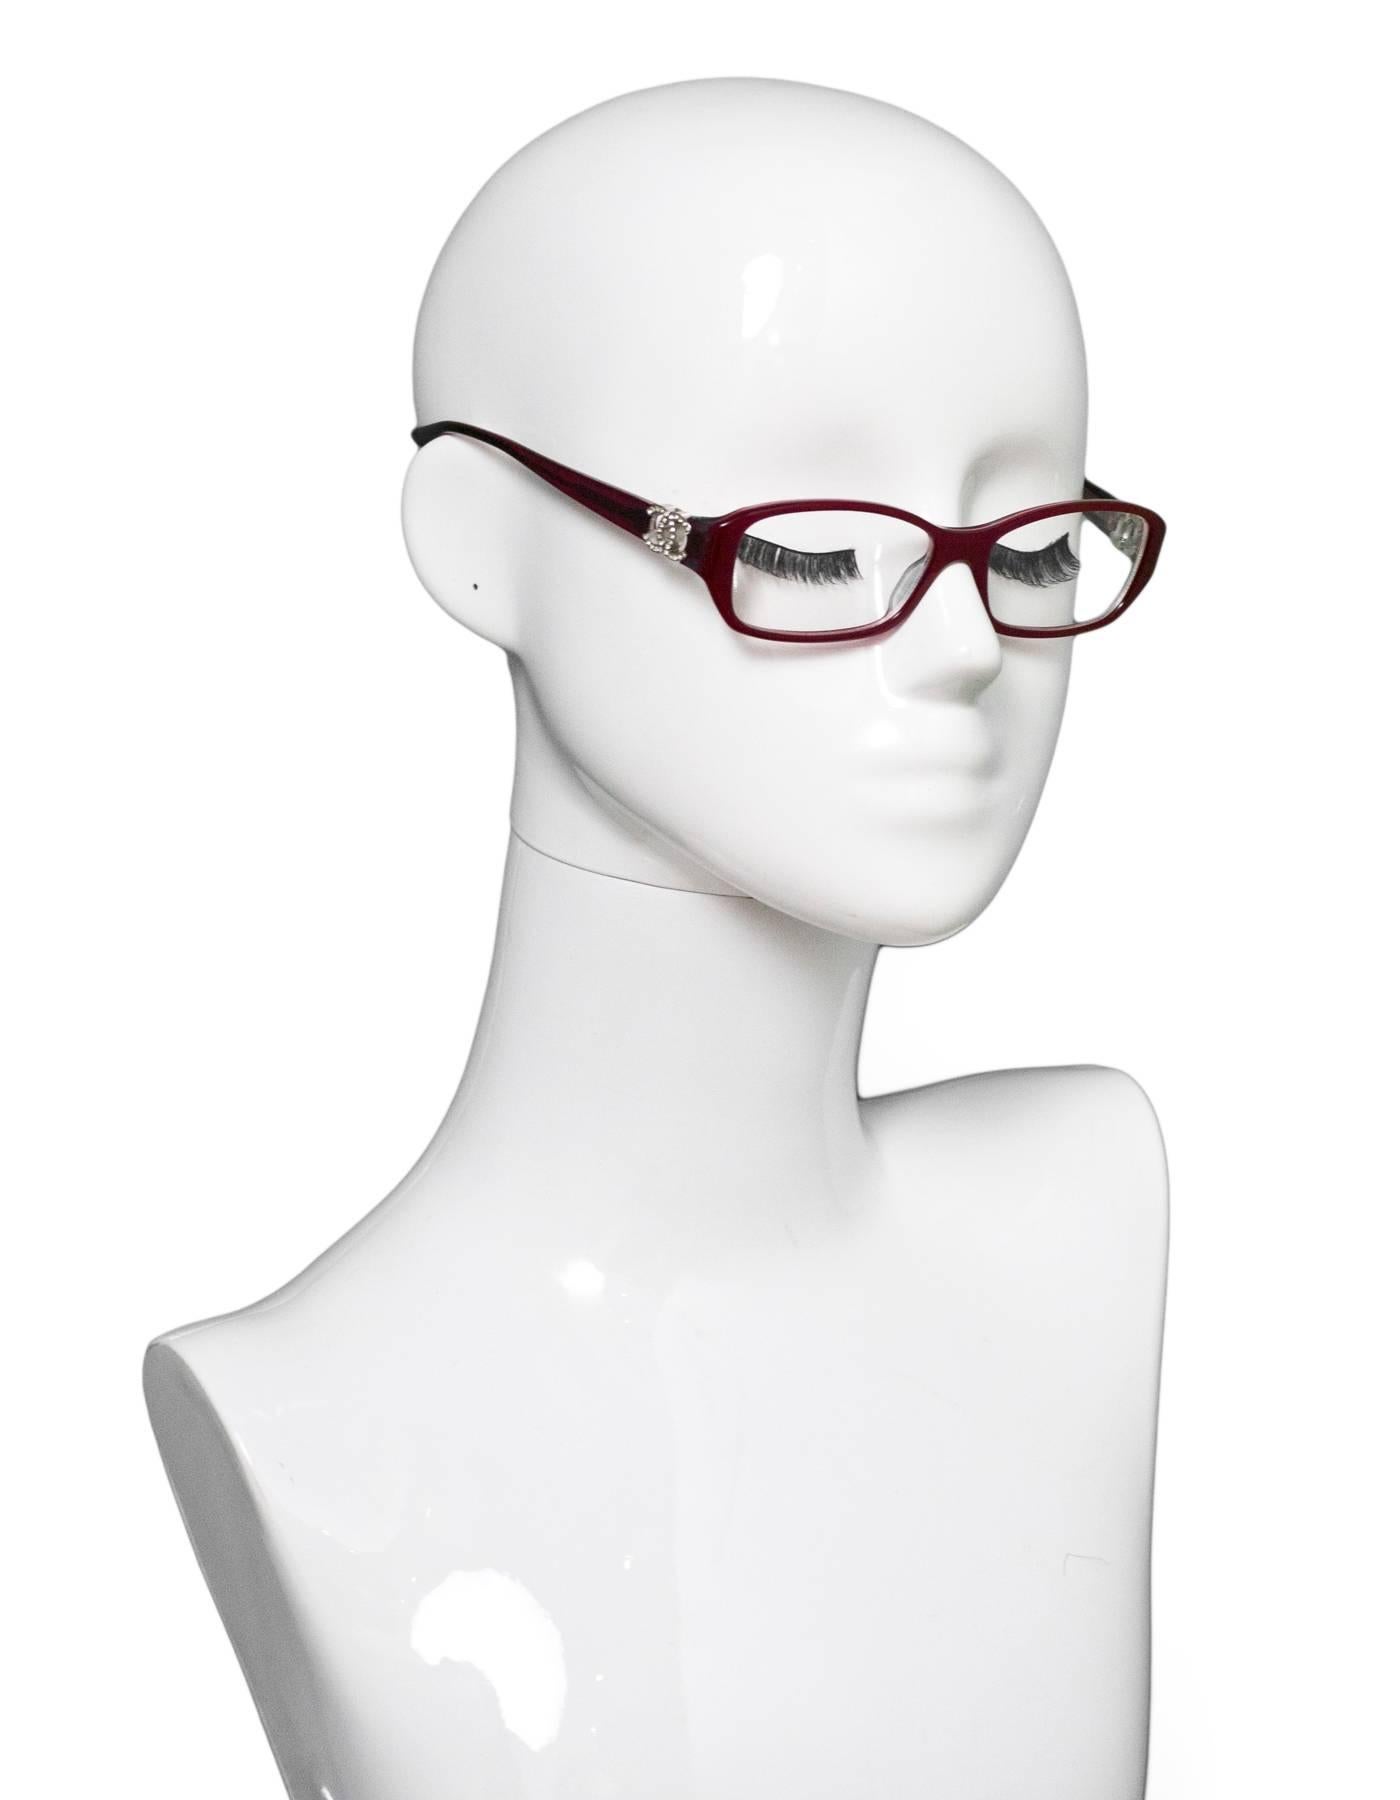 Chanel Red with Crystal CC Prescription Eyeglasses

Made In: Italy
Color: Red
Materials: Resin, crystal
Overall Condition: Excellent pre-owned condition with the exception of prescription lenses
Includes: Chanel case

Measurements: 
Length Across: